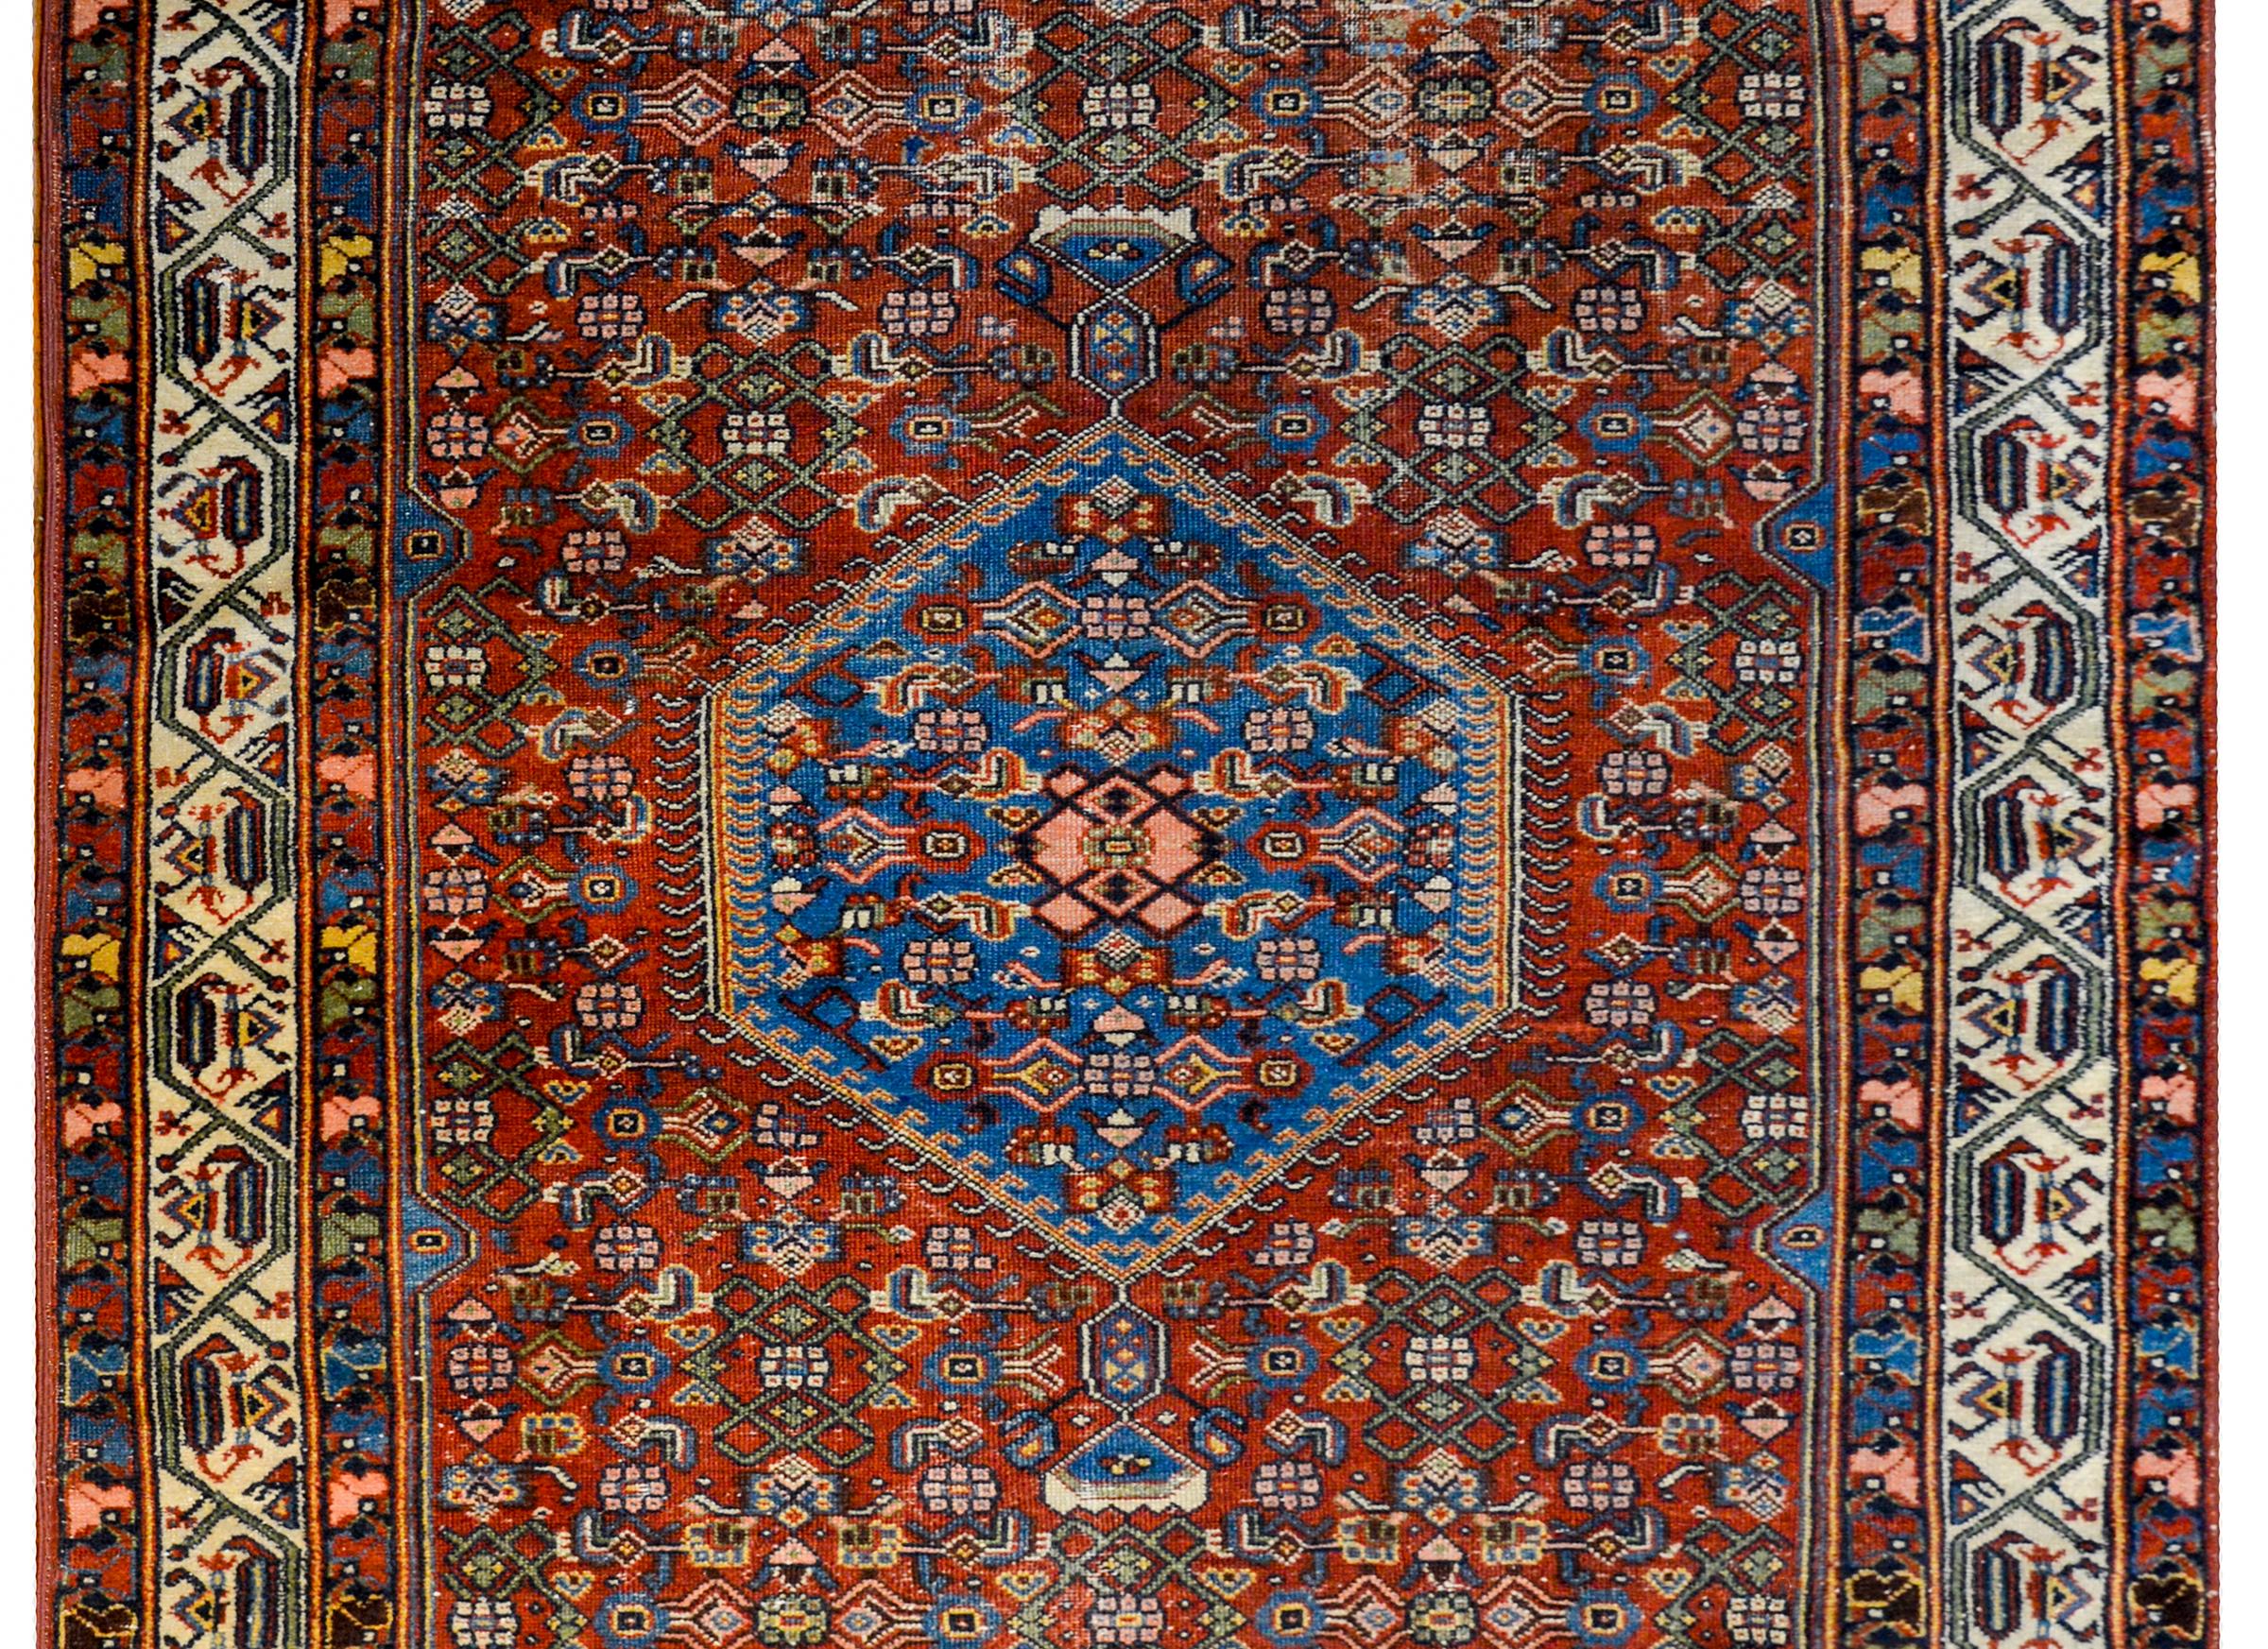 A gorgeous early 20th century Persian Bidjar Herati rug with an incredible central diamond medallion with a floral and leaf trellis pattern on an indigo background. The medallion lives amidst a field of similarly patterned floral and leaf trellis